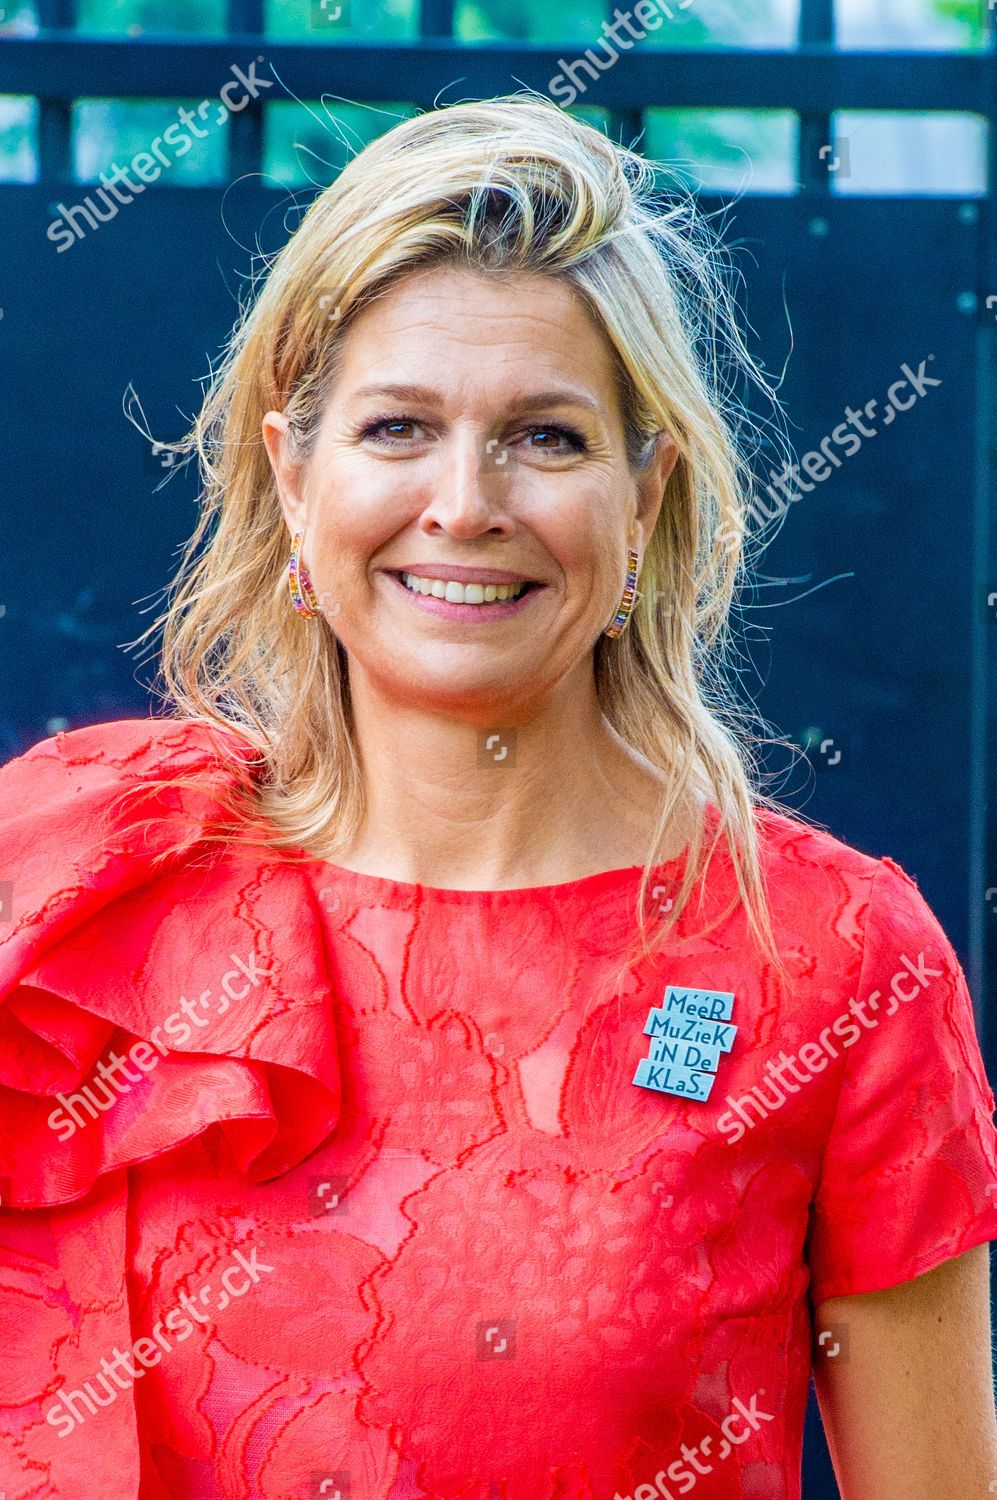 queen-maxima-signing-the-more-music-covenant-in-the-classroom-drenthe-the-netherlands-shutterstock-editorial-10317631aj.jpg